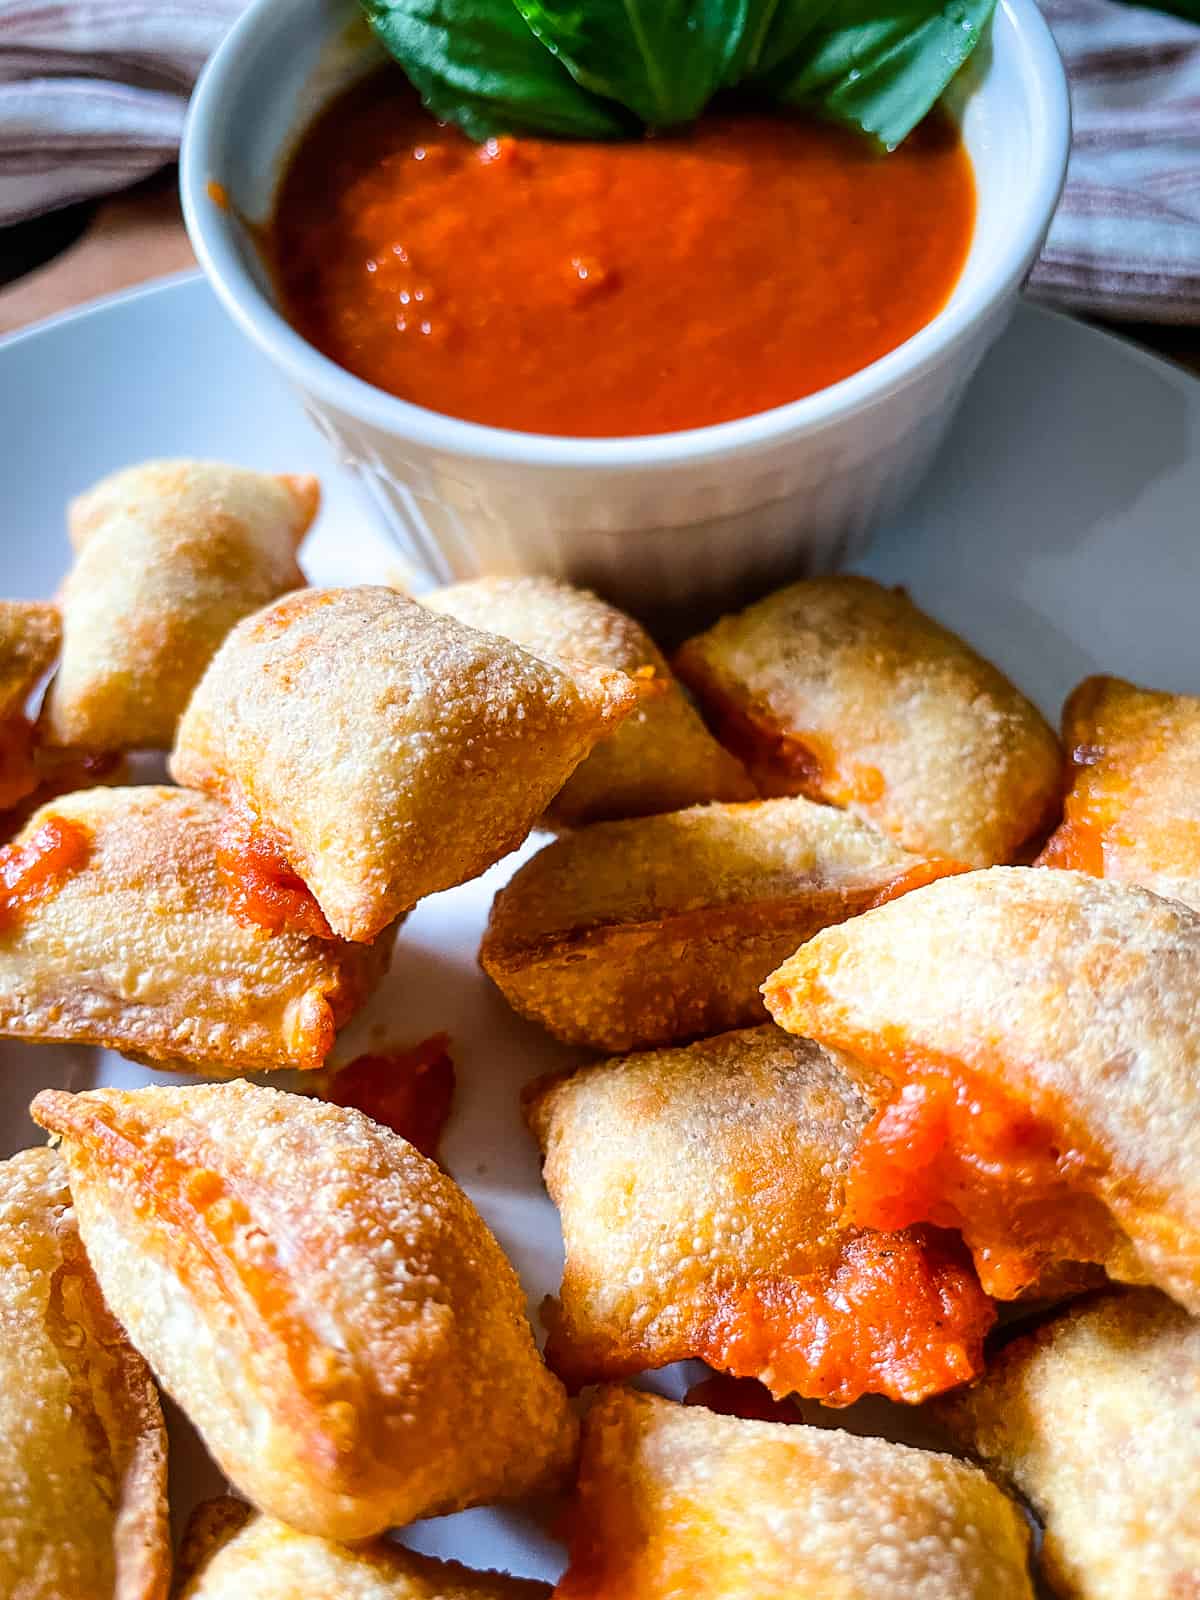 White plate with a pile of freshly made pizza rolls and marinara sauce for dipping